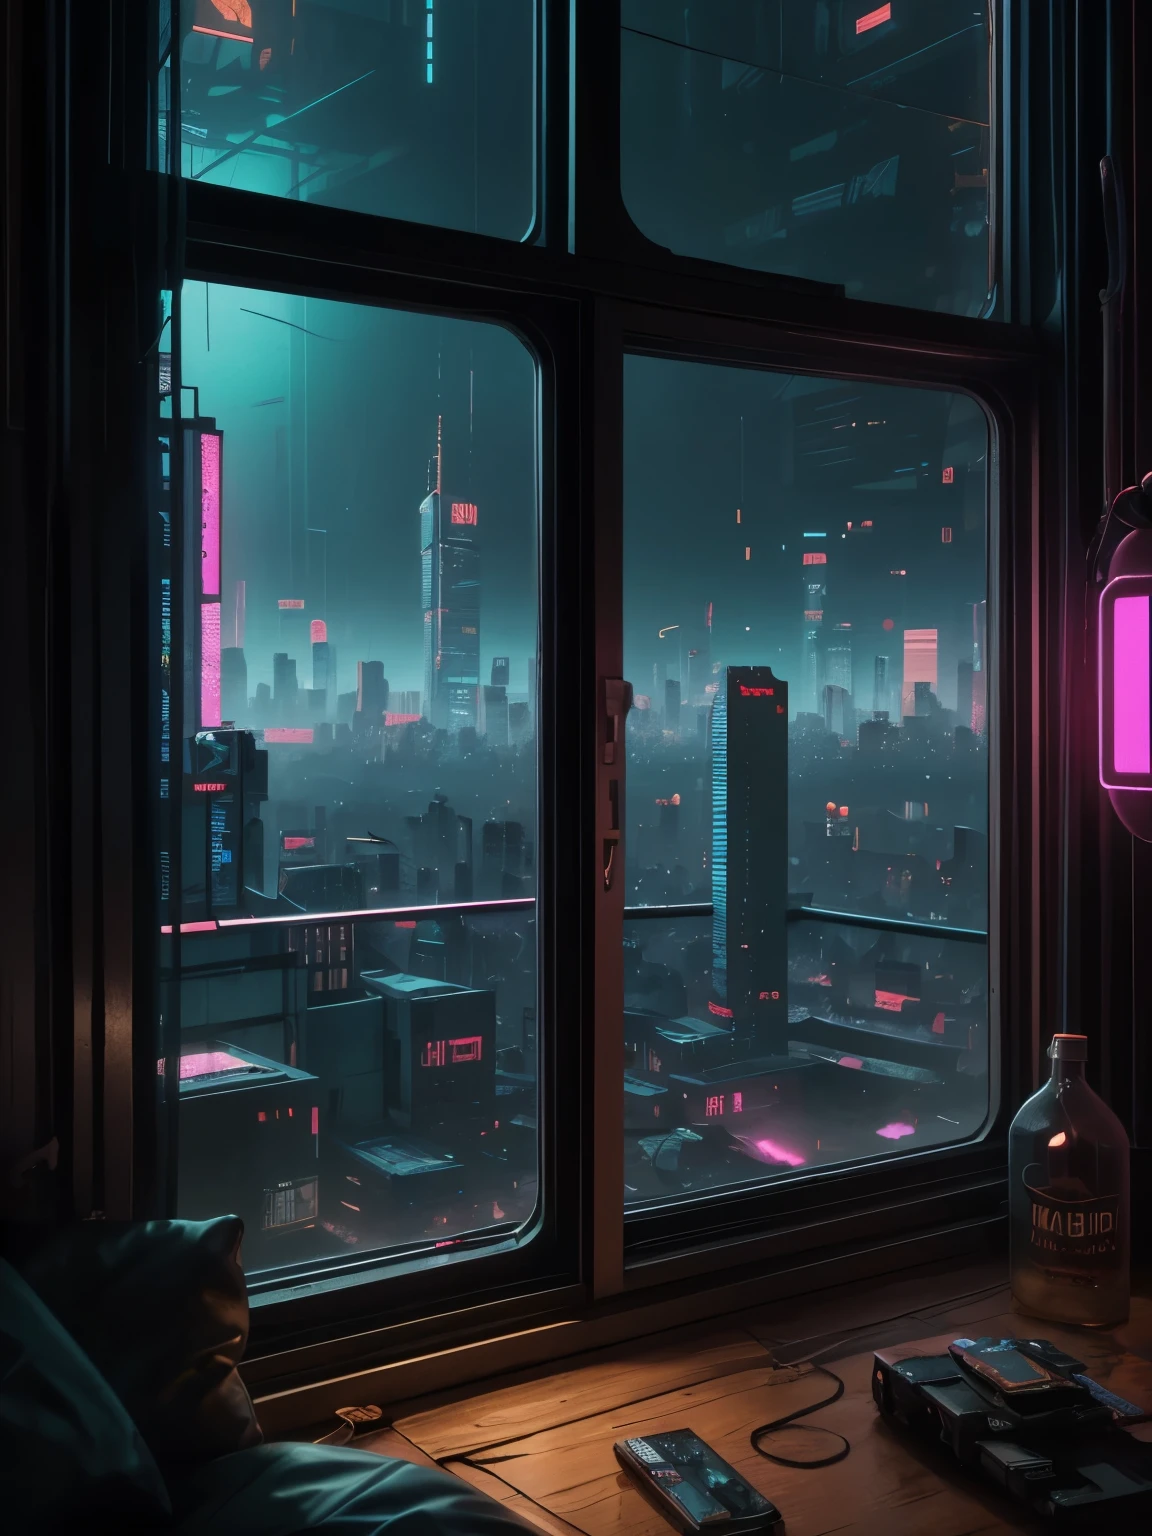 Generate a cozy and peaceful interior with a large window directly across from the camera. Through the window is a massive (((cyberpunk cityscape))) with (neon lights), highly detailed buildings, and colorful accents. The window and cityscape are important and should be focal points of the image. The room offers a sanctuary from the busy details of everyday life. This image should contrast quiet interiors with vibrant, busy, dynamic exteriors. Take inspiration from Kamen Nikolov's cyberpunk work on Artstation. Utilize trending art styles and dynamic lighting to create a ((masterpiece)). 